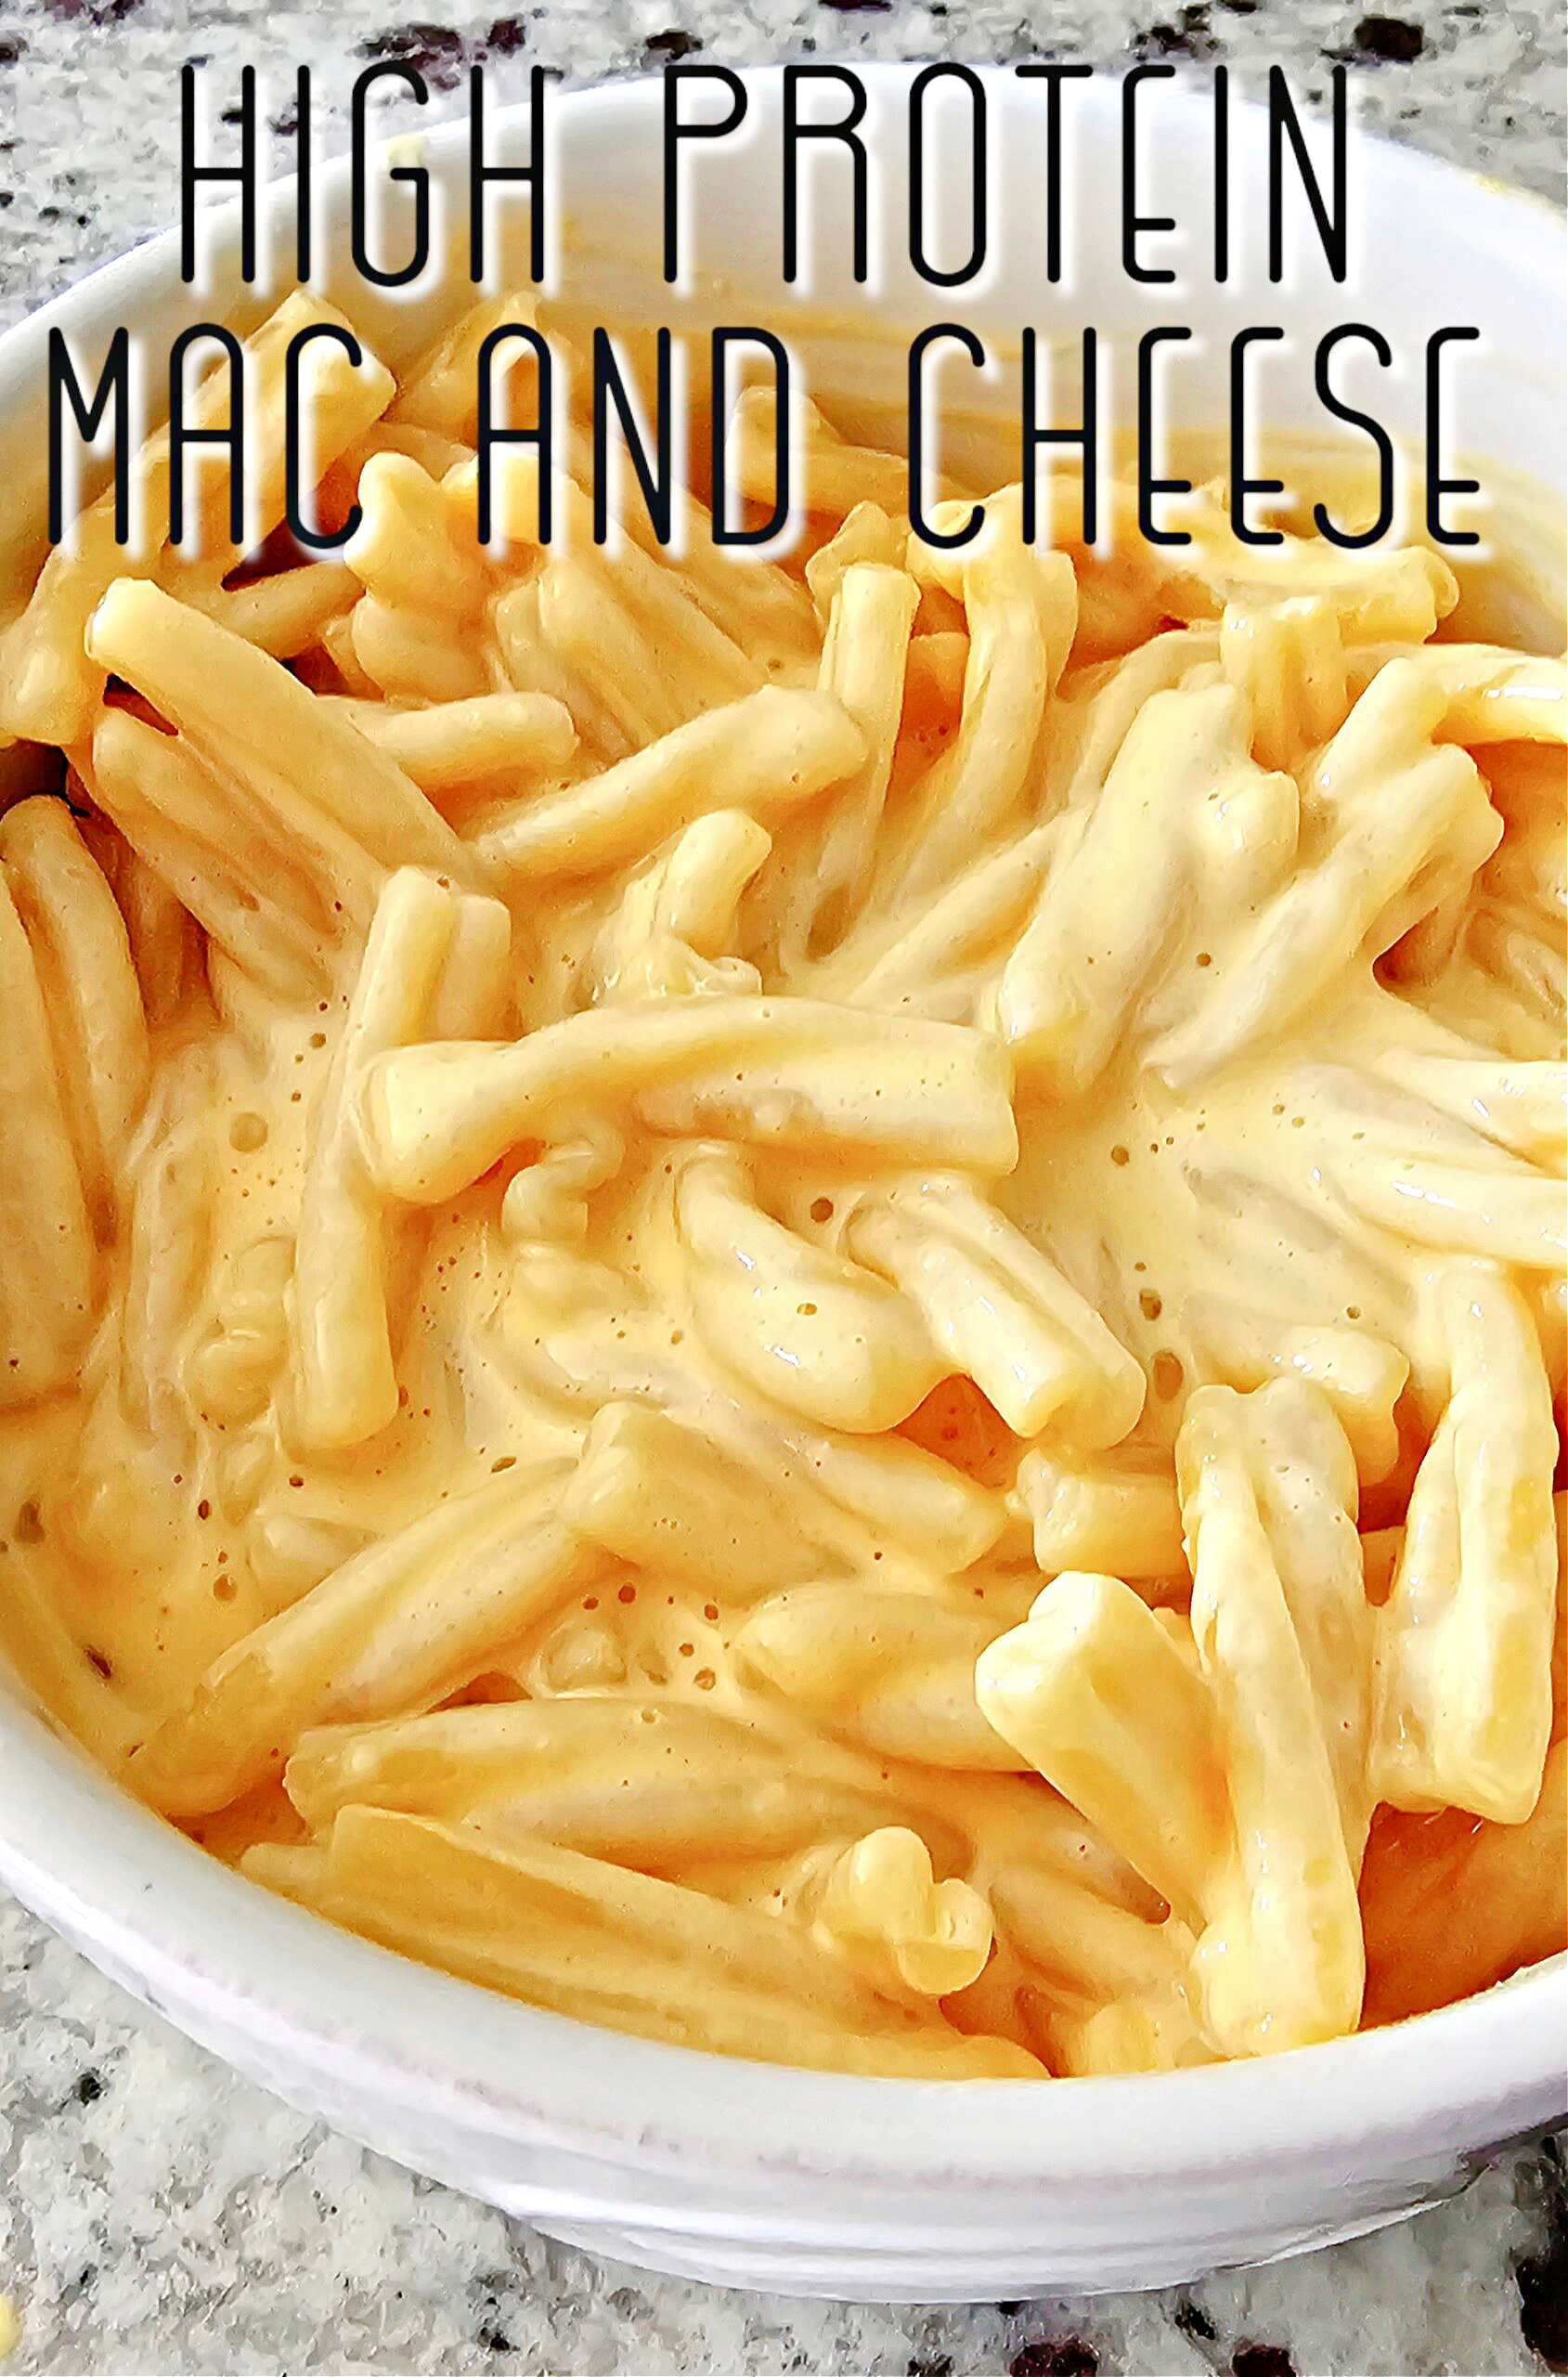 High Protein Mac and Cheese Sauce #macandcheese #highprotein #pasta #dinner #easyrecipe #onepotmeal